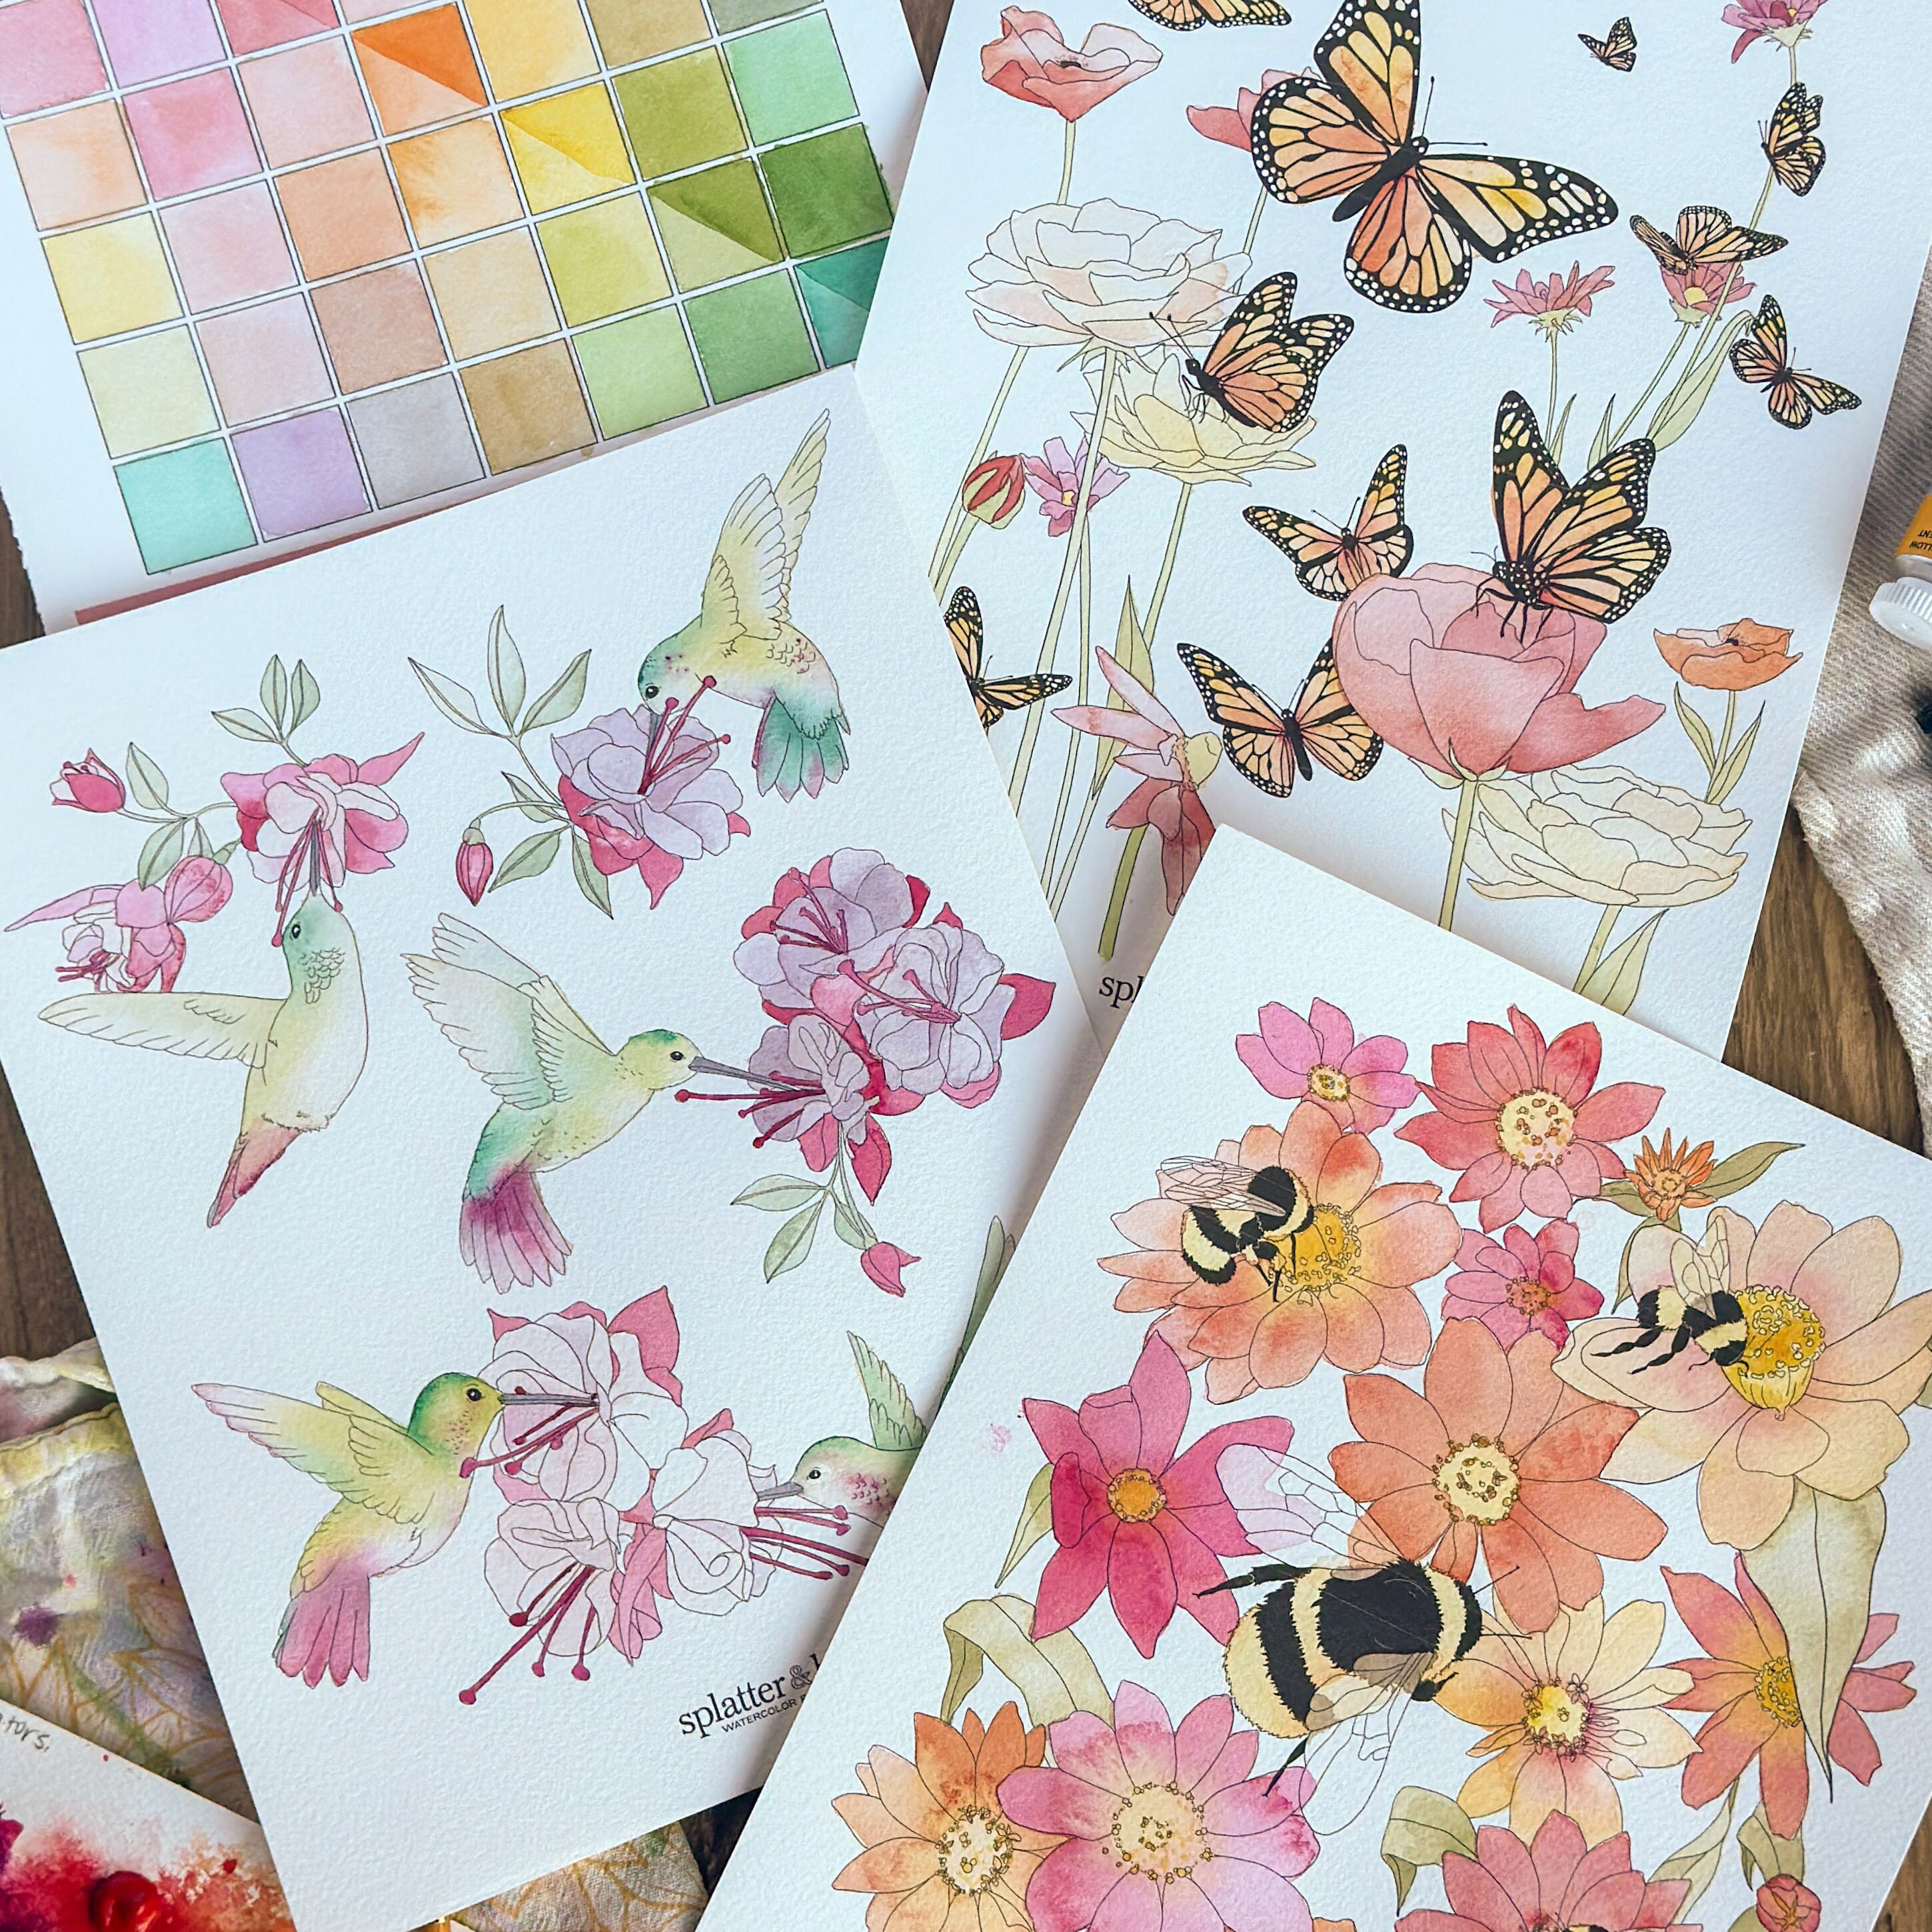 Watercolor Painting Kit, 3 Designs Included, Fall Theme, Florals, Dahlias,  for Adults, for Kids, Indoor Activity, Beginner Watercolor 